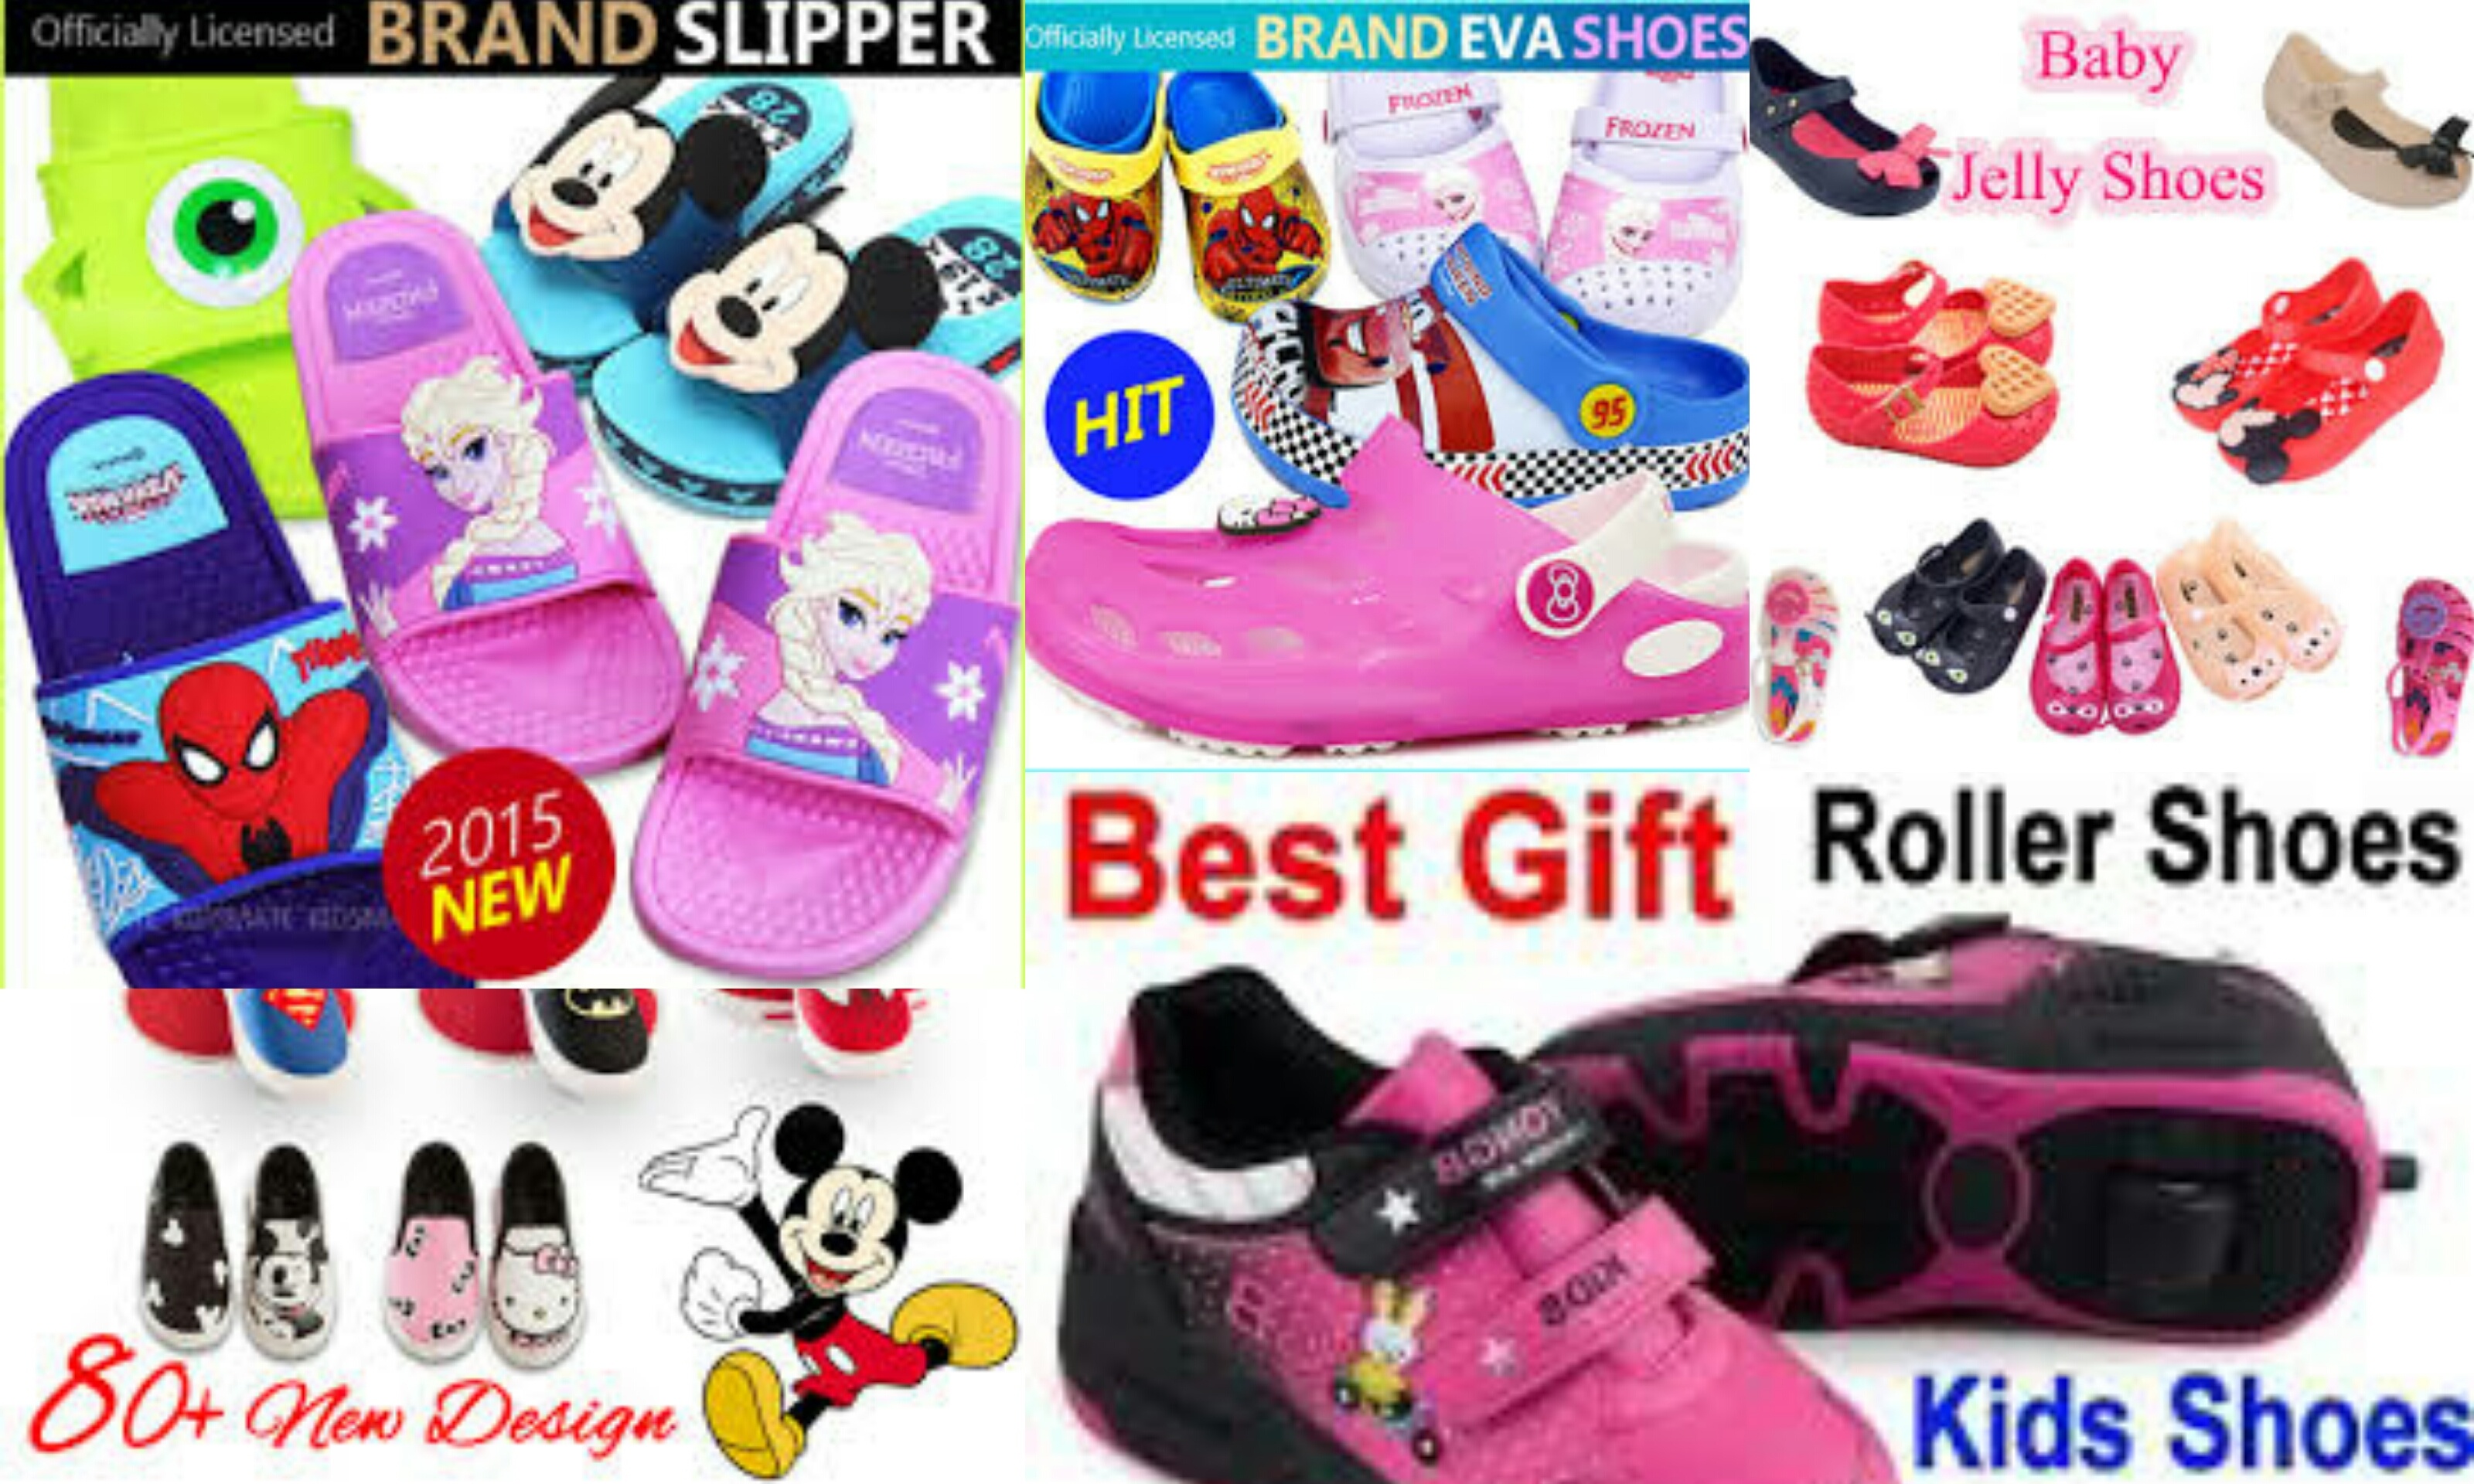 SALE! Kids Shoes, Toddler \u0026 Baby Shoes